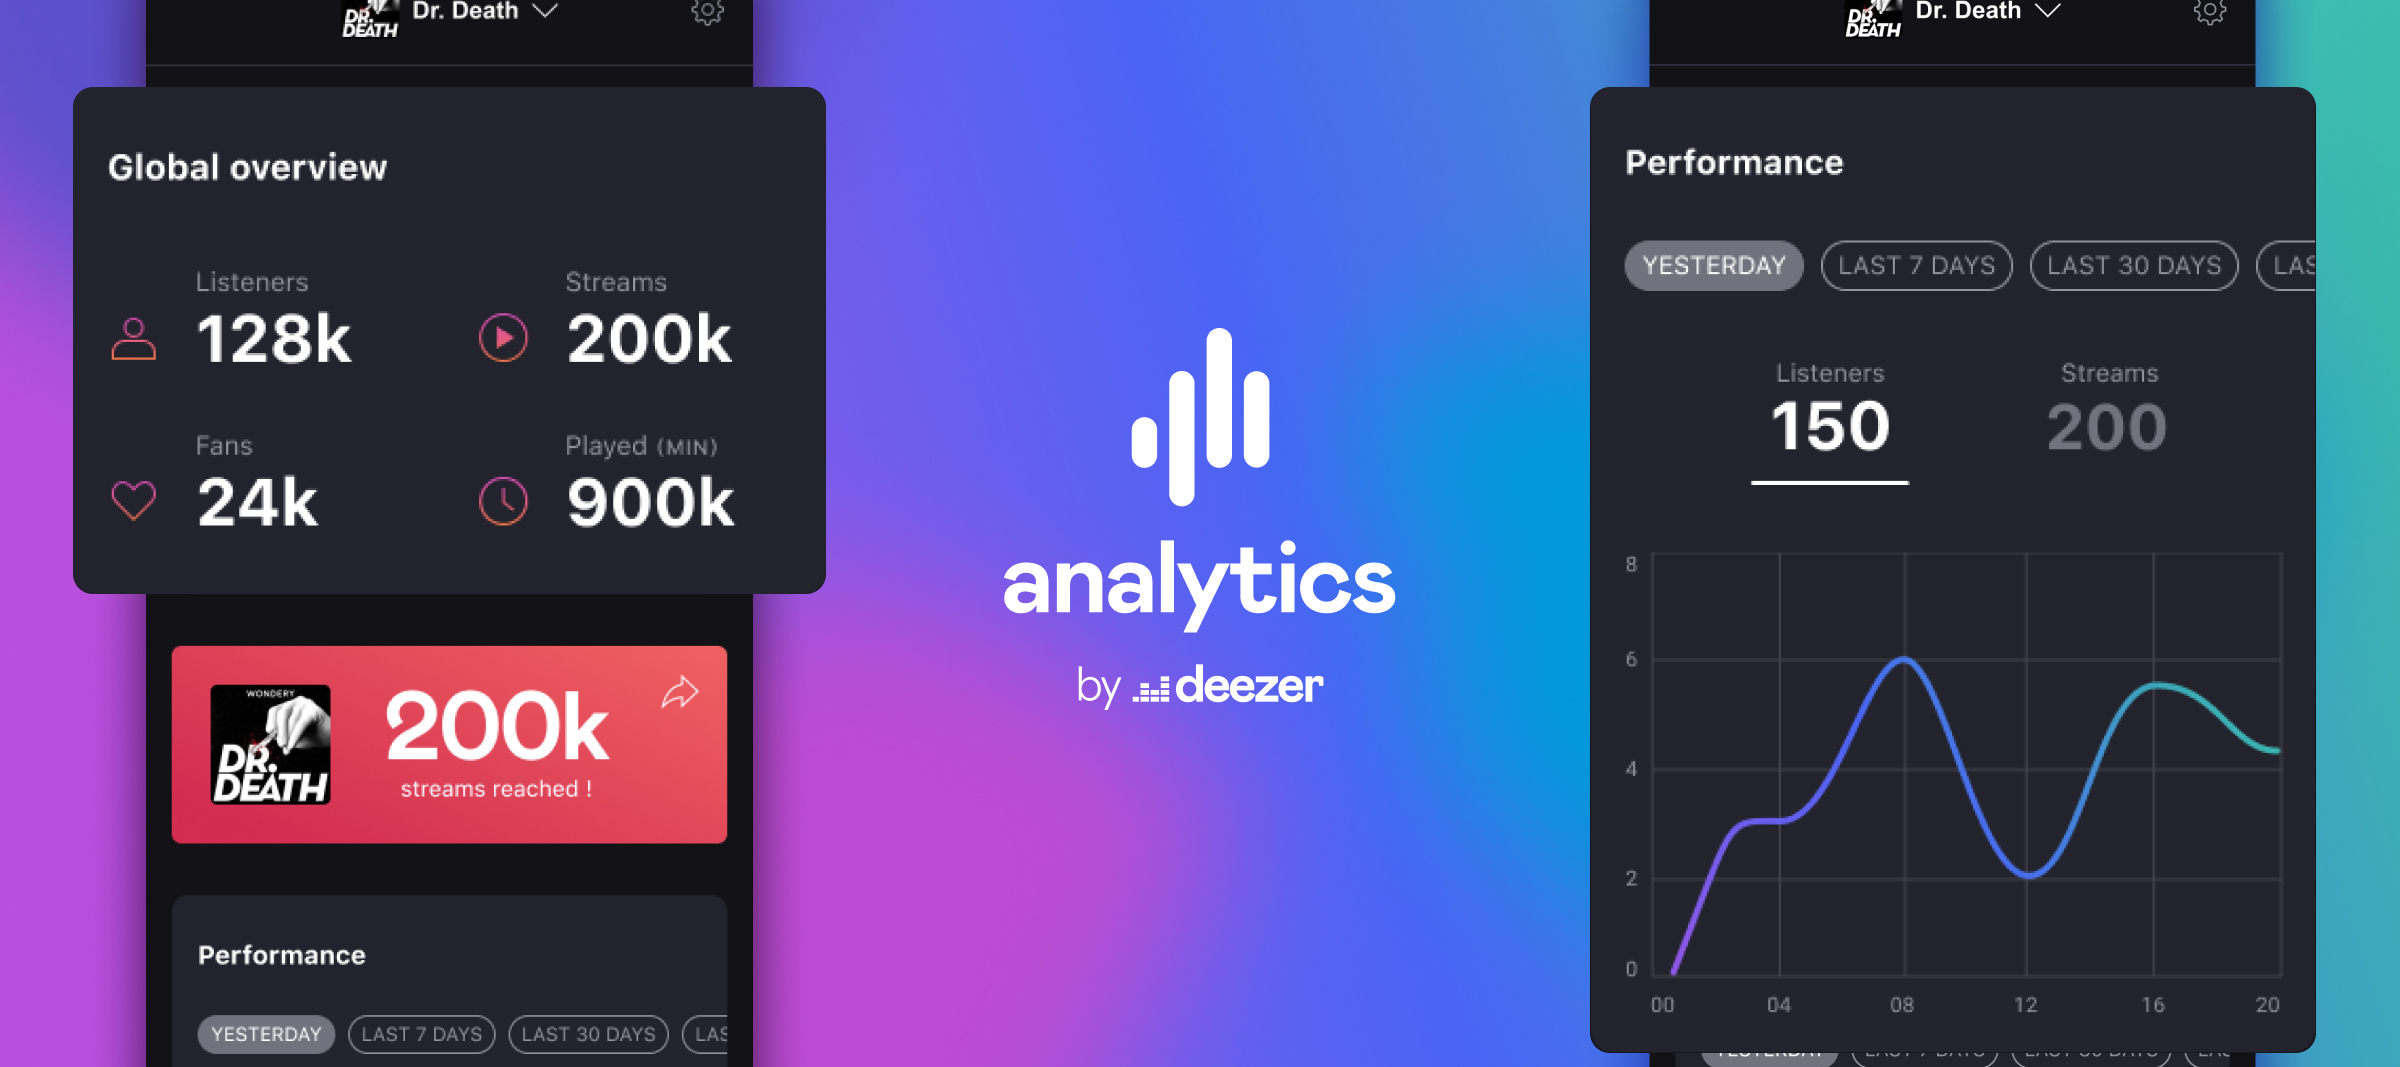 Analytics by Deezer - a new tool for Podcasters